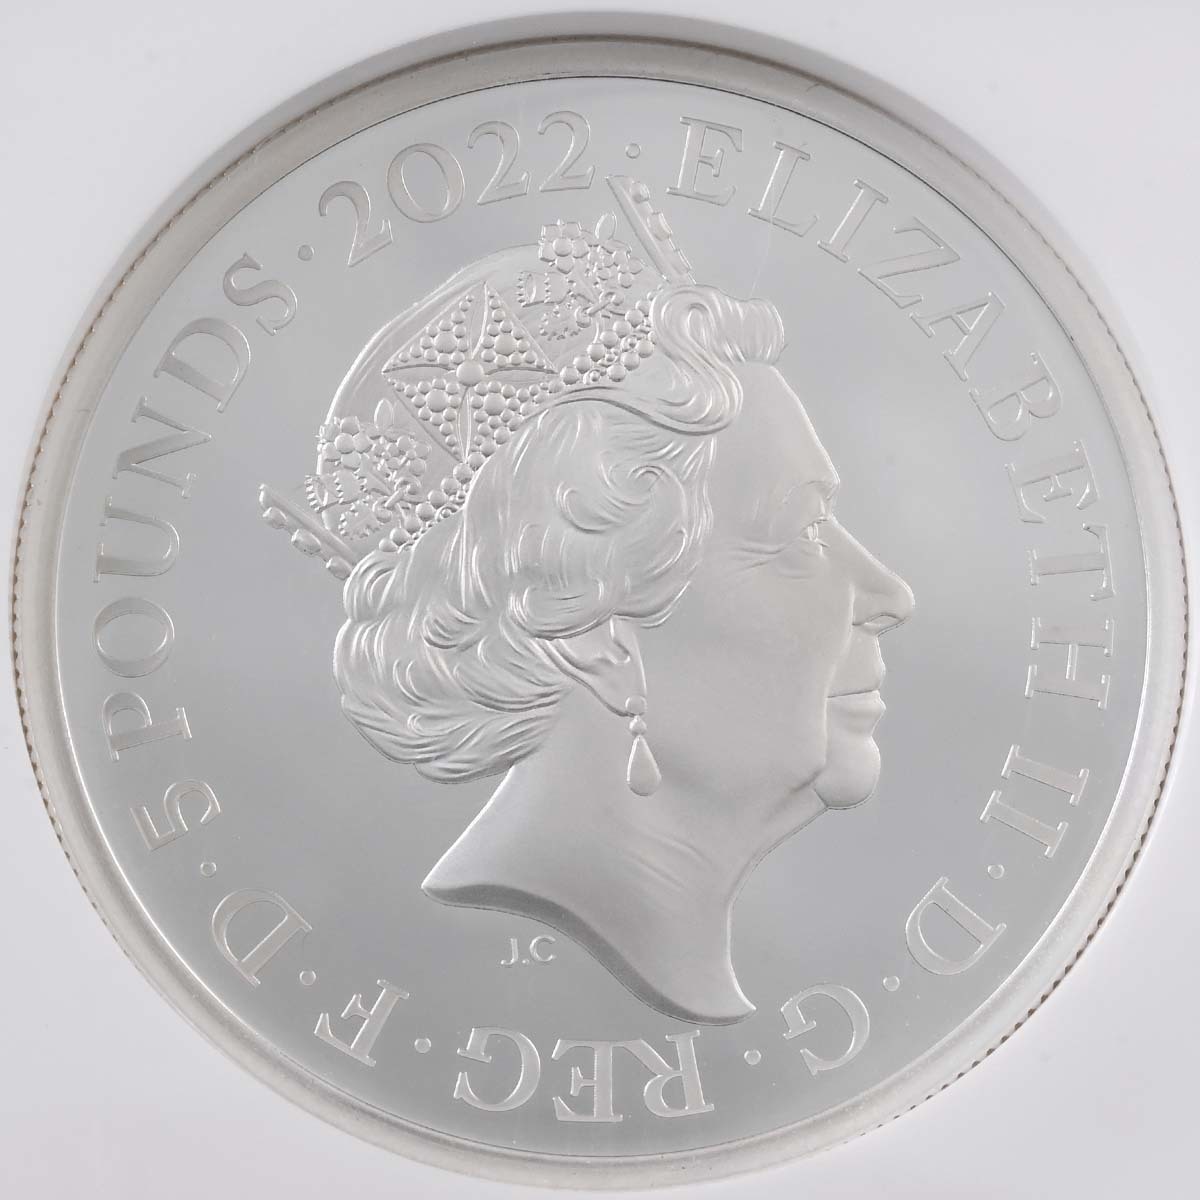 UK22H7S2O 2022 British Monarchs Henry VII 2oz Silver Proof Coin NGC Graded PF 70 Ultra Cameo First Releases Obverse